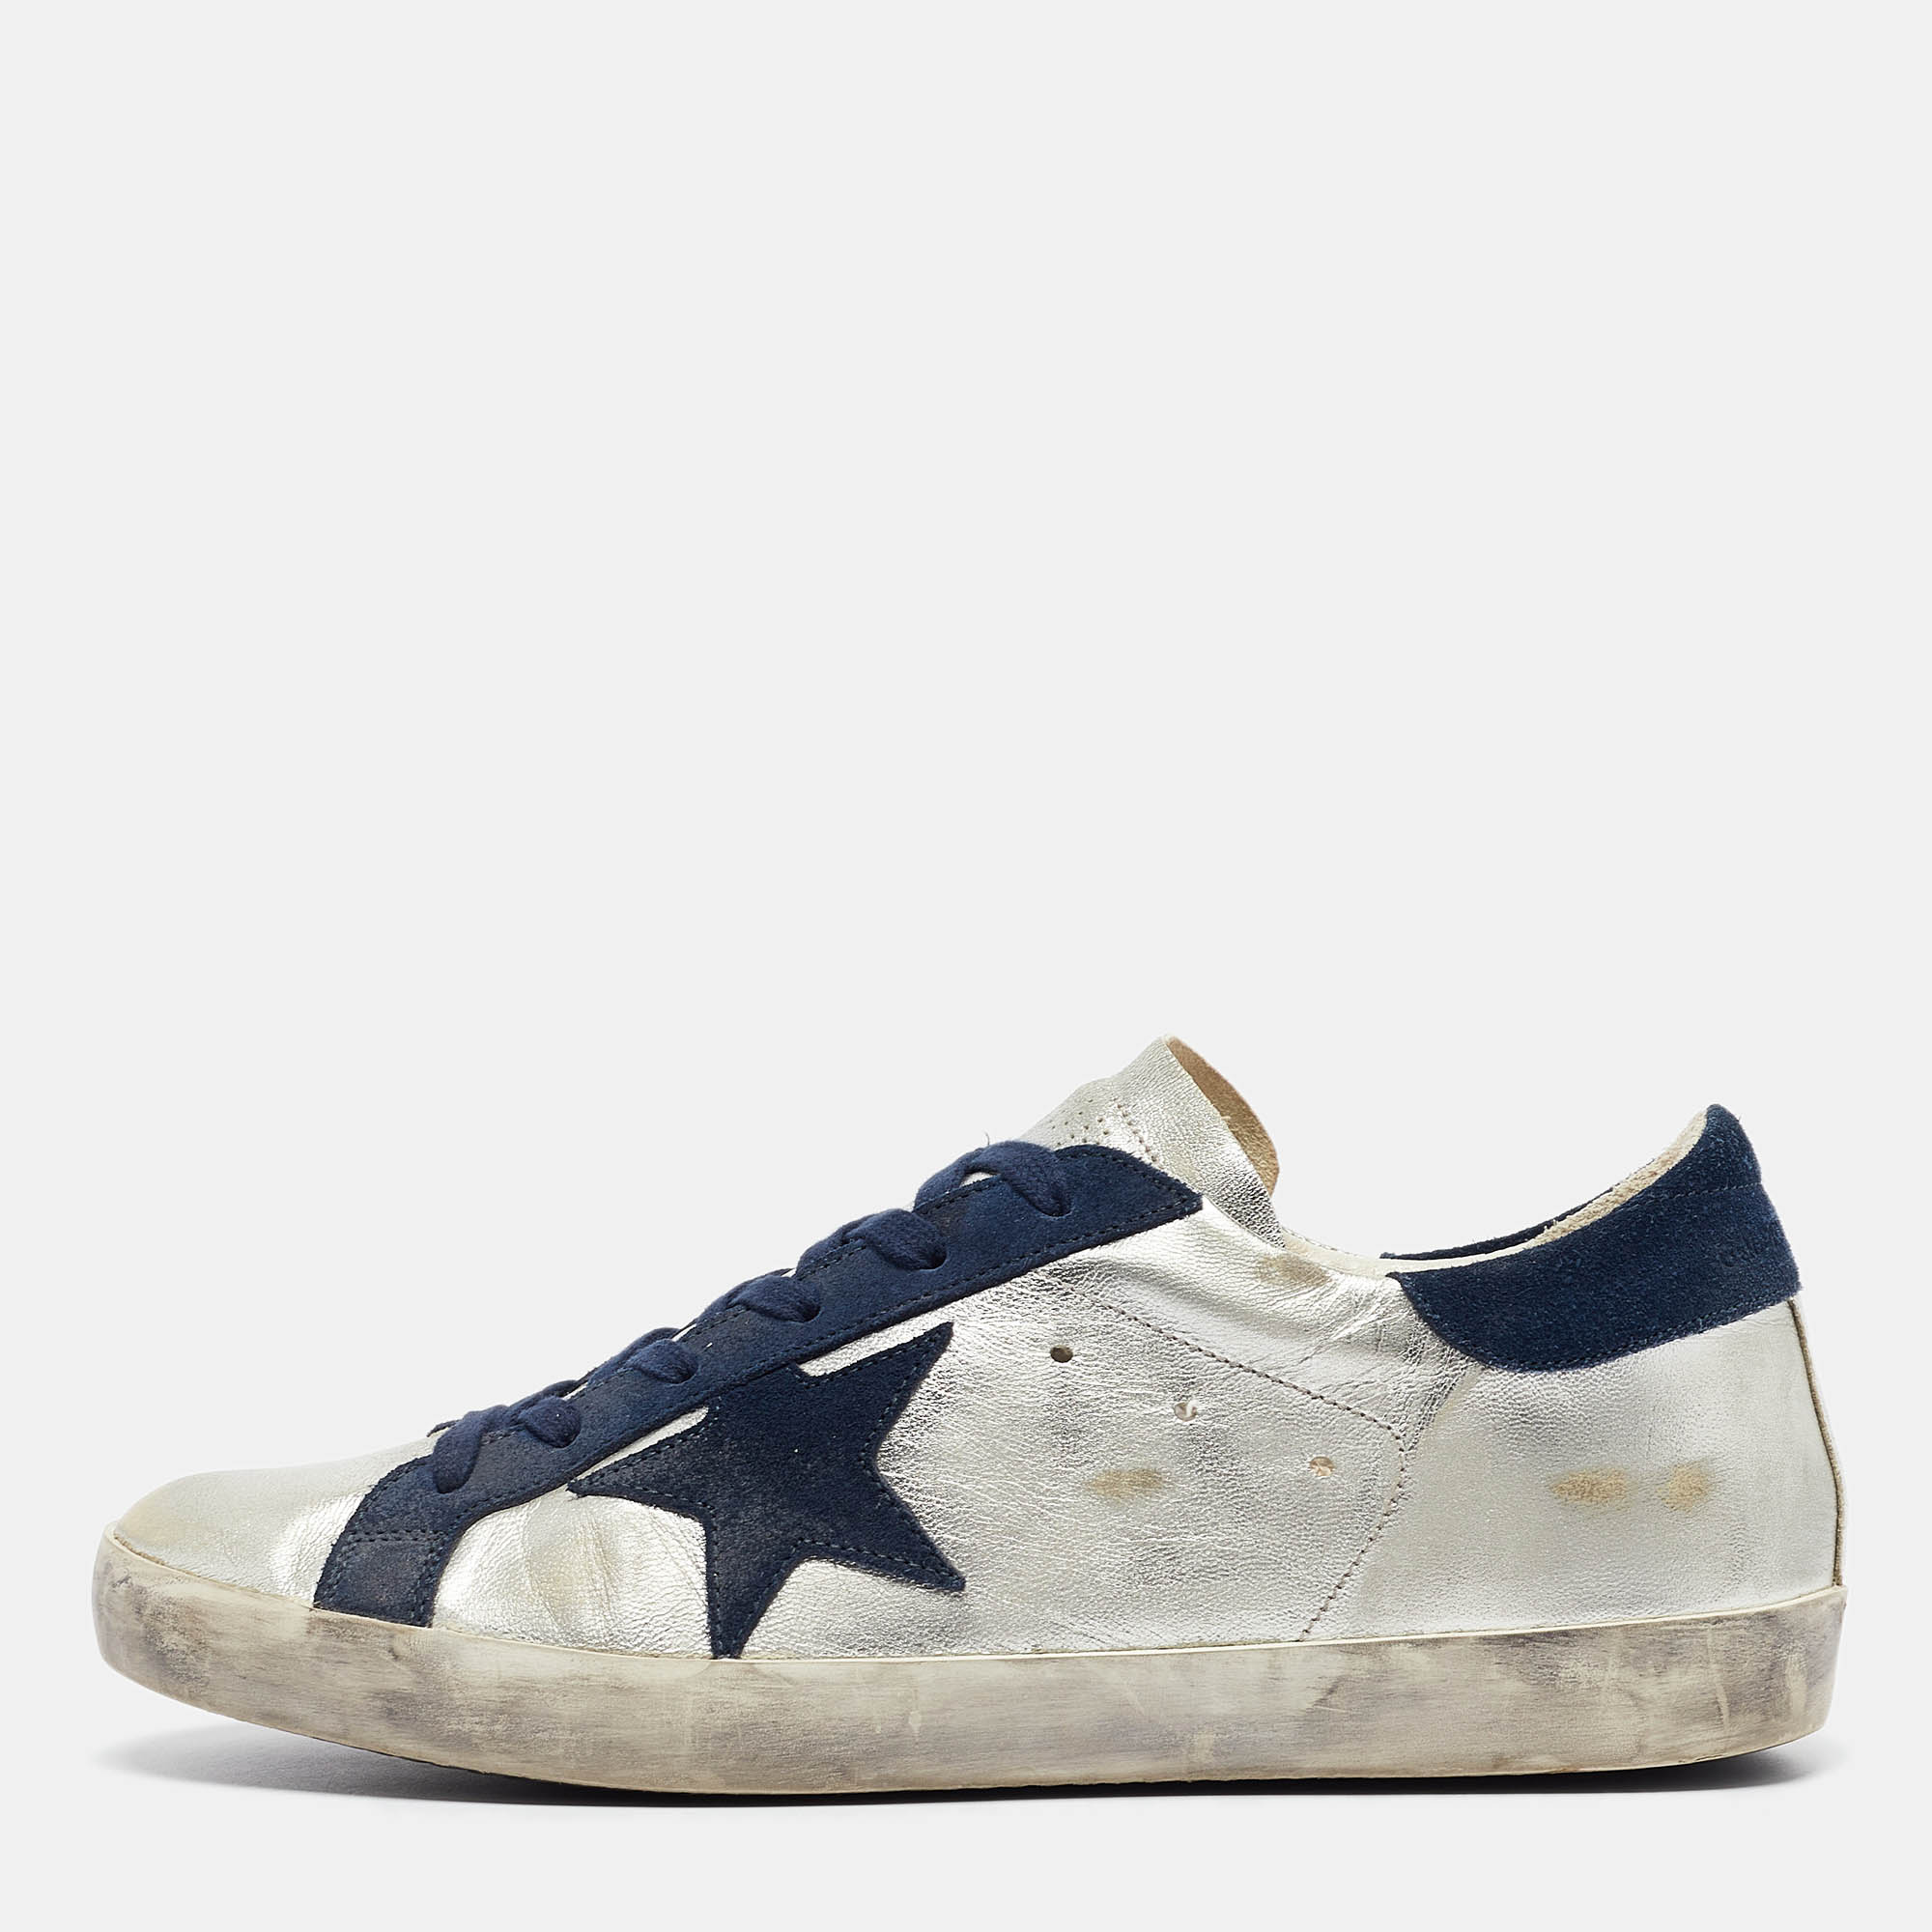 

Golden Goose Silver/Navy Blue Leather and Suede Superstar Sneakers Size